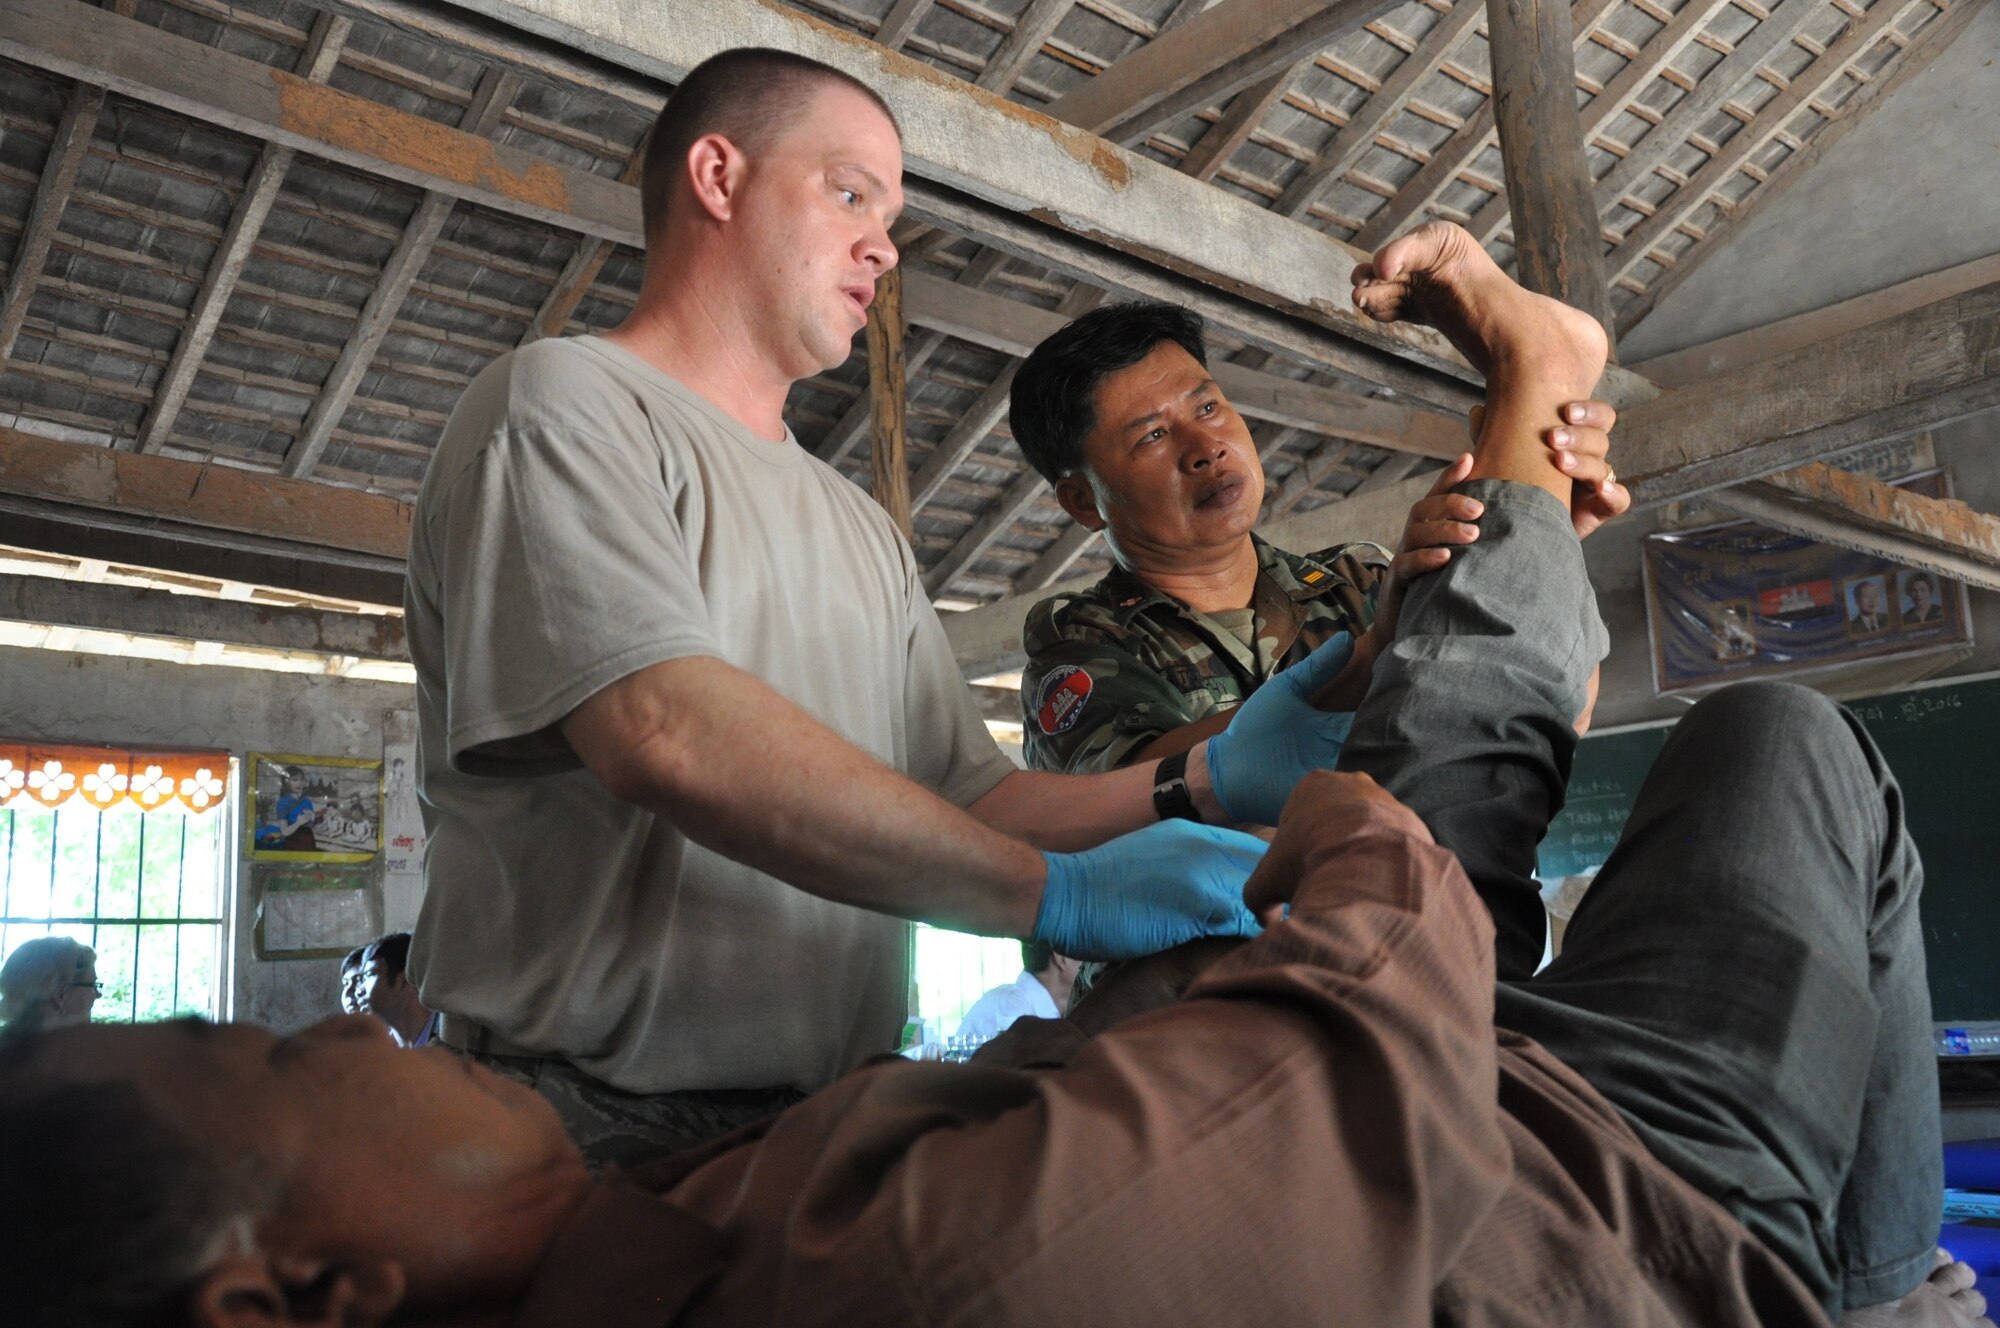 U.S. Air Force Tech. Sgt. Michael Lewis and Royal Cambodian Armed Forces Capt. Tob Vuthy treat a patient for lower back pain June 17, 2016, during Pacific Angel 16-2 in Kampot Province, Cambodia. Throughout the course of the week doctors, dentists, and pharmacists from the U.S., Cambodia, Australia, Vietnam and Thai militaries and two non-governmental organizations, along with 65 volunteers from the provincial hospital and local villages, saw more than 3,400 patients at two different sites. Together they provided general health, dental, optometry, pediatrics, and physical therapy services. (U.S. Air Force photo by Capt. Susan Harrington/Released)